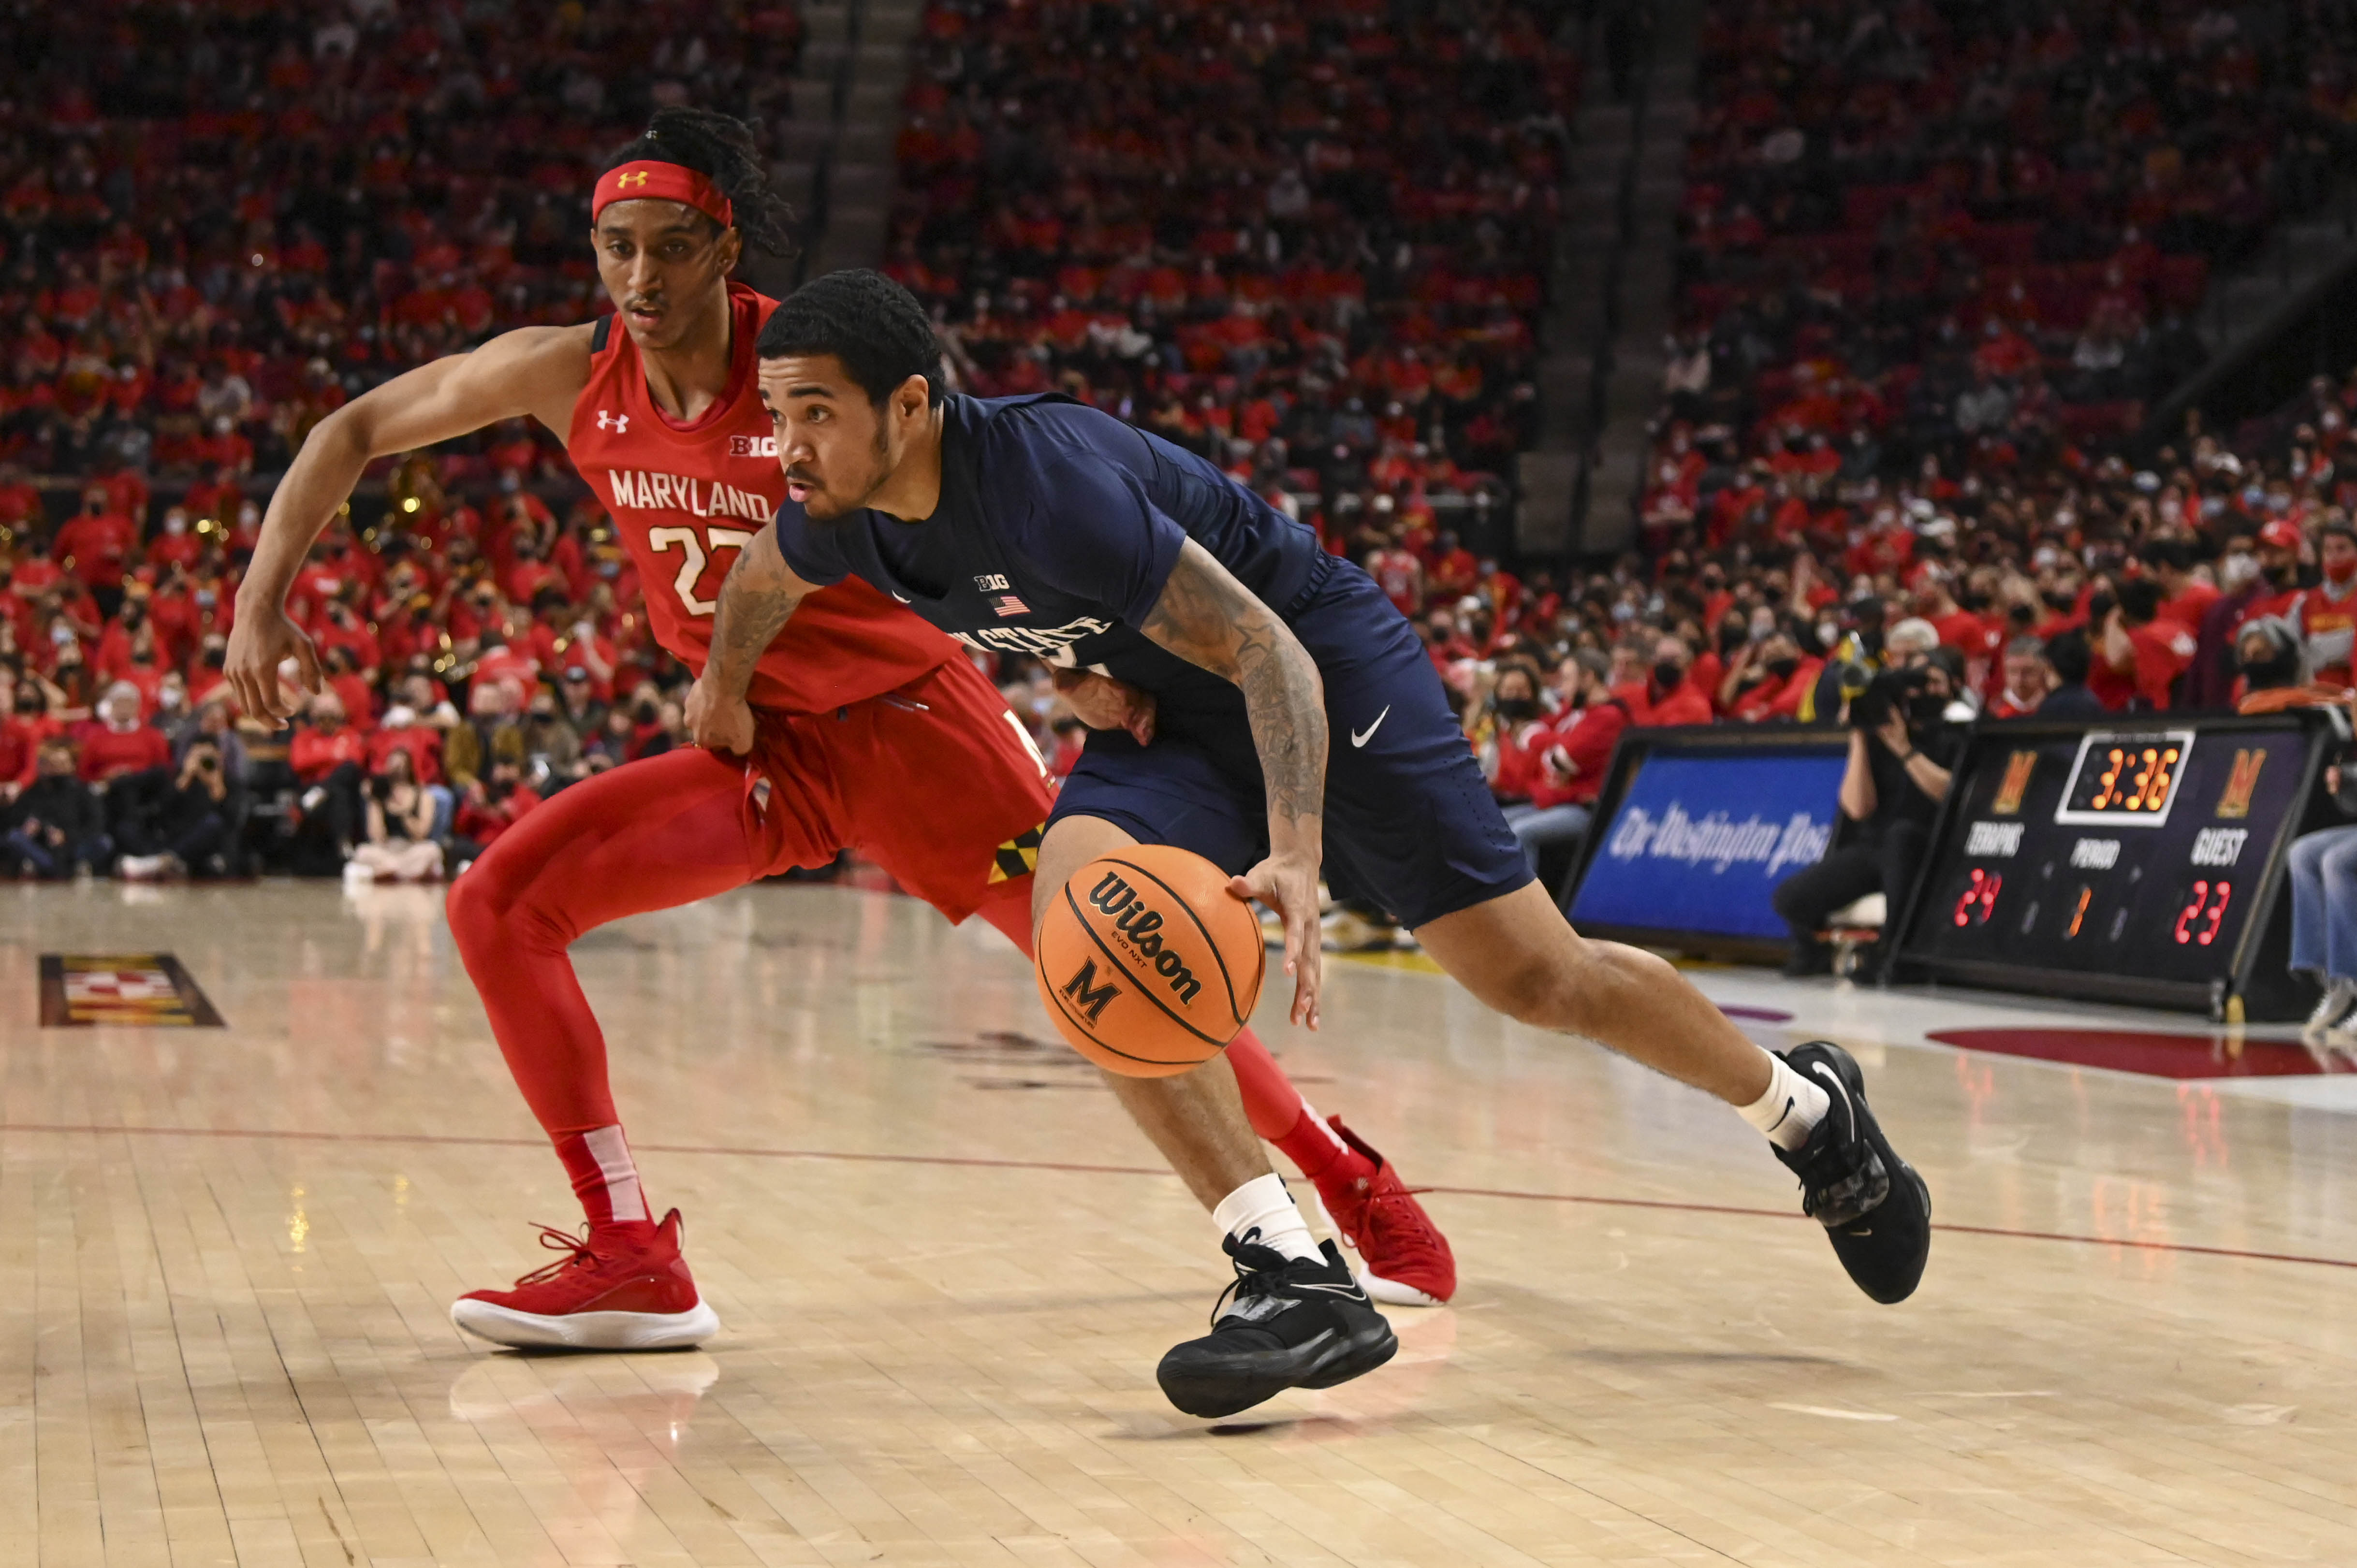 Penn State Nittany Lions guard Sam Sessoms (3) makes a move to the basket on Maryland Terrapins guard Ian Martinez (23) during the first half at Xfinity Center